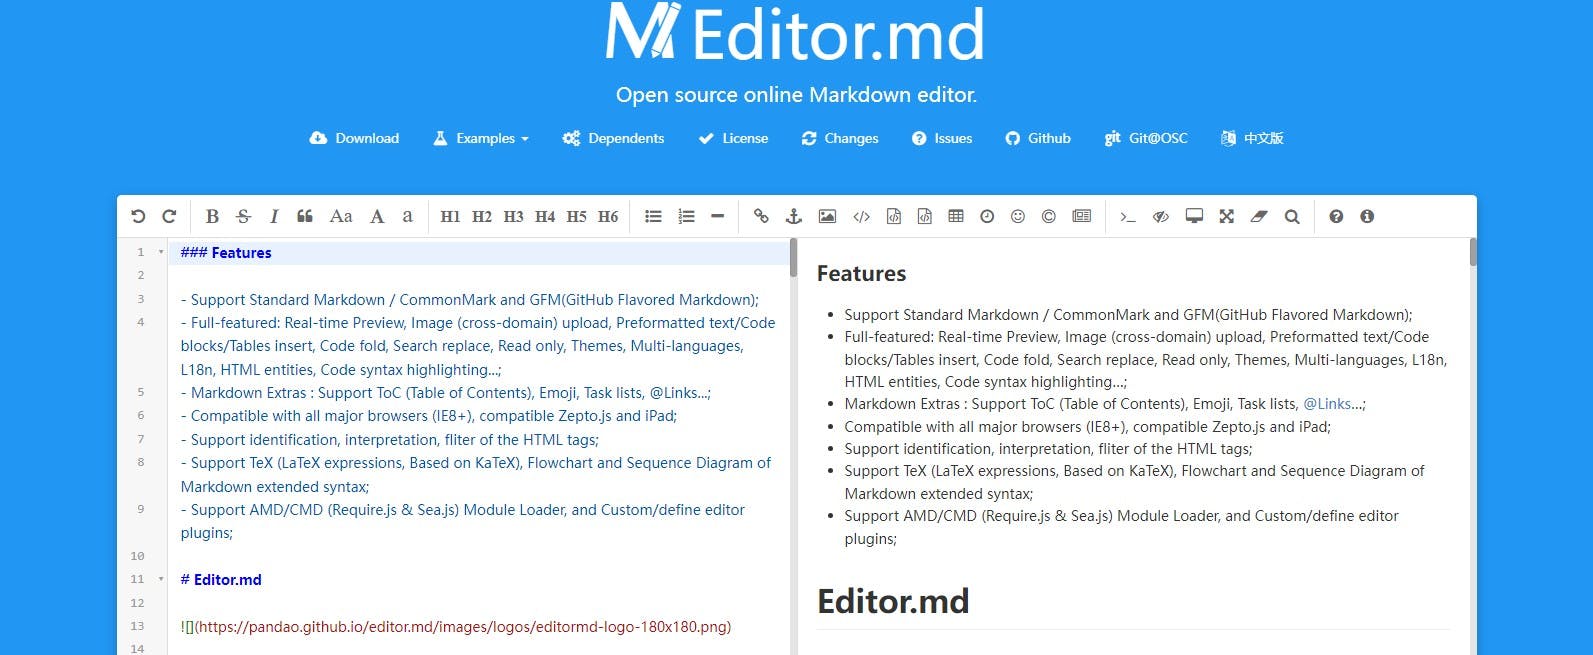 Editor.md - A feature-rich Markdown editor with syntax highlighting, emoji support, and mathematical formula rendering.